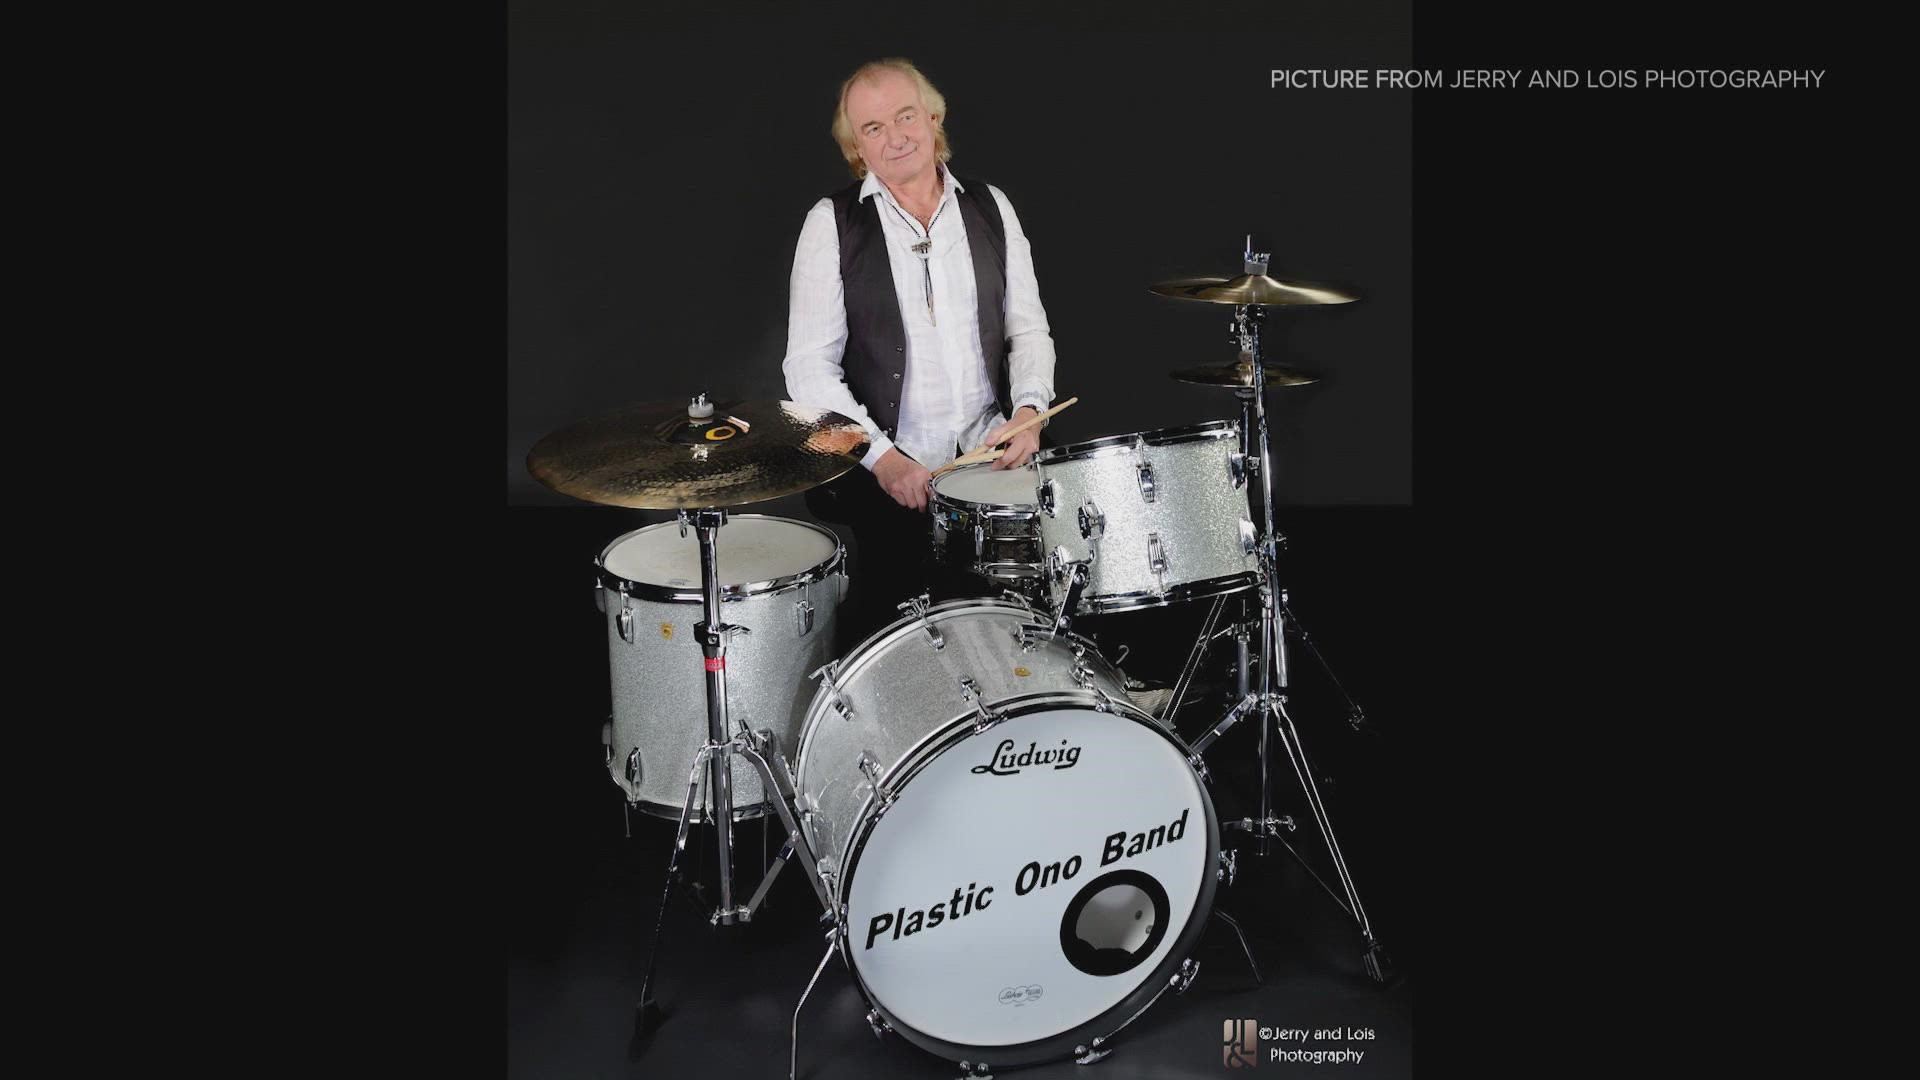 A drum kit belonging to Alan White, a Rock & Roll Hall of Famer, was stolen late last month along with many other items when thieves targeted his storage unit.